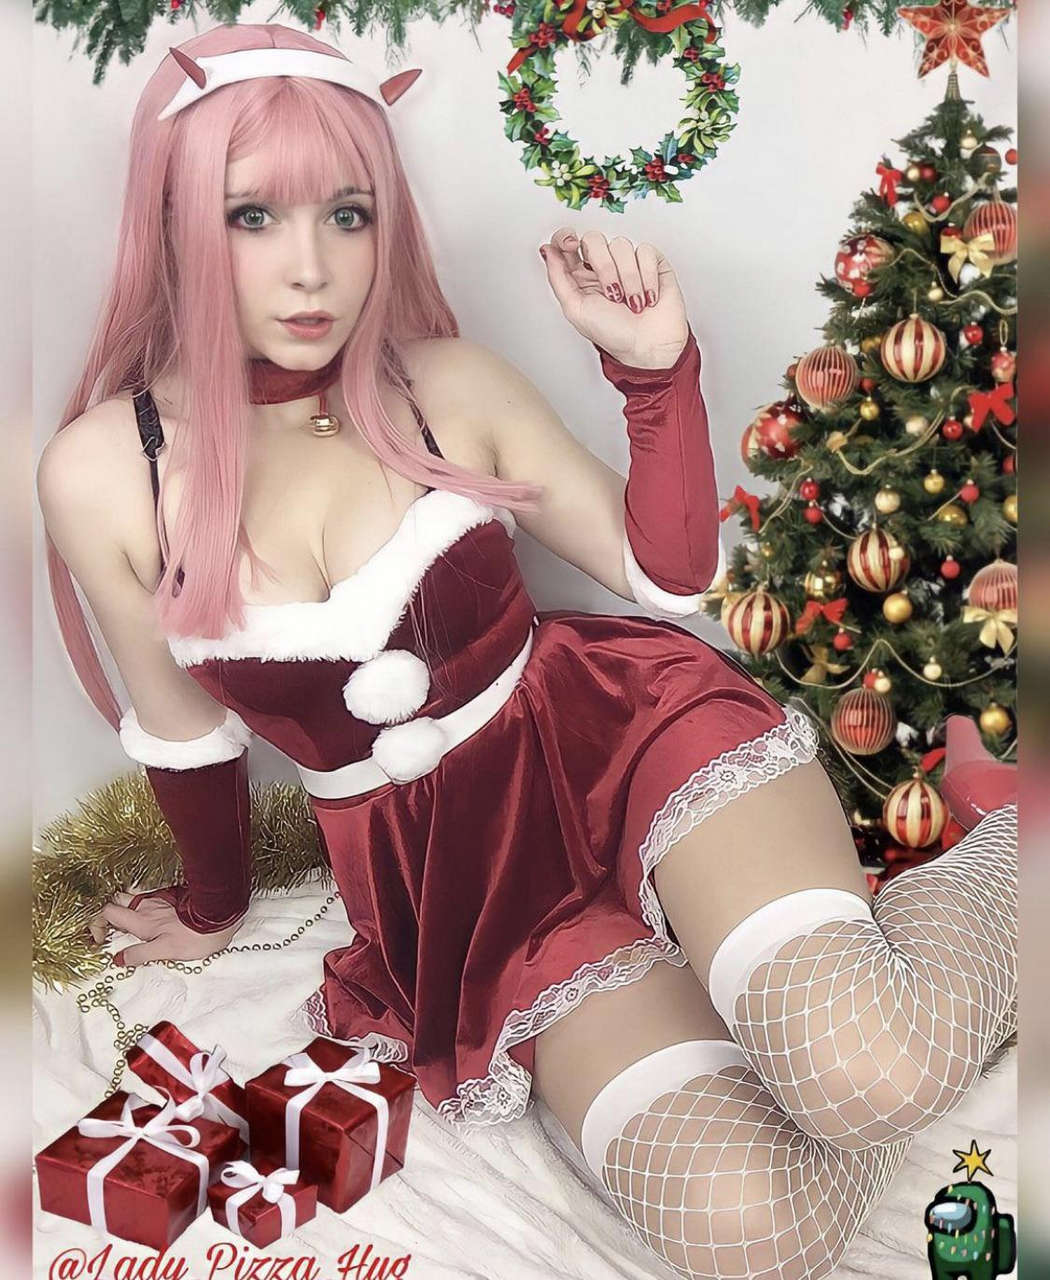 A Sexy Zero Two Christmas Cosplay Done By Lady Pizza Hug On Instagram